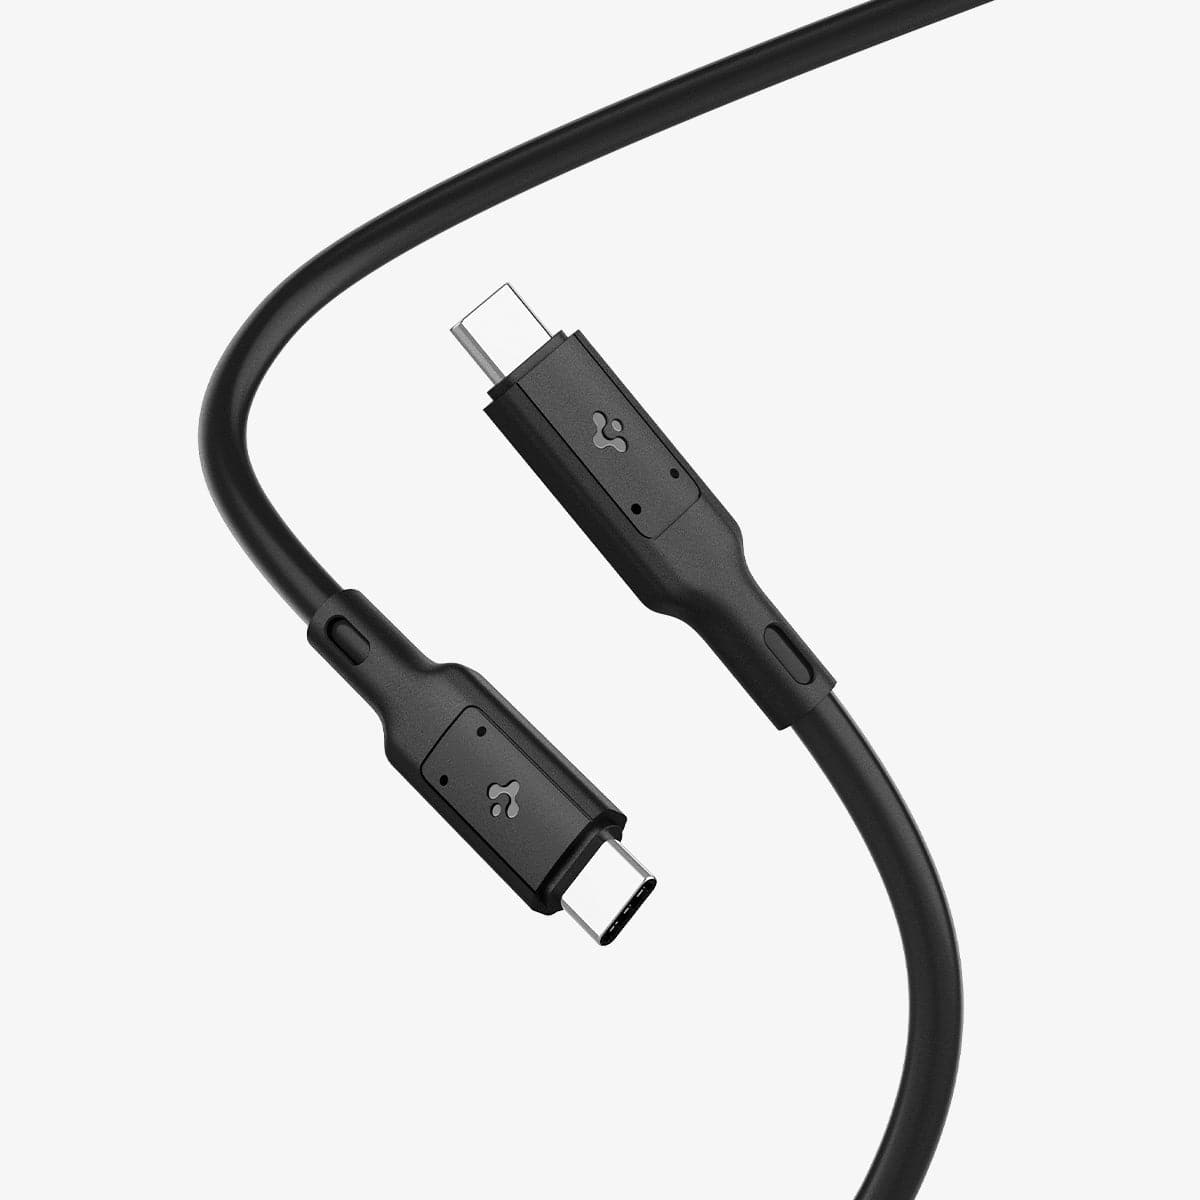 USB-C Charging Cable Cord Wire for Newest Power Banks Compatible with  iWalk, Spigen PocketBoost, INIU, RAVPower, BONAI, Anker USB-C & Other  PowerBanks